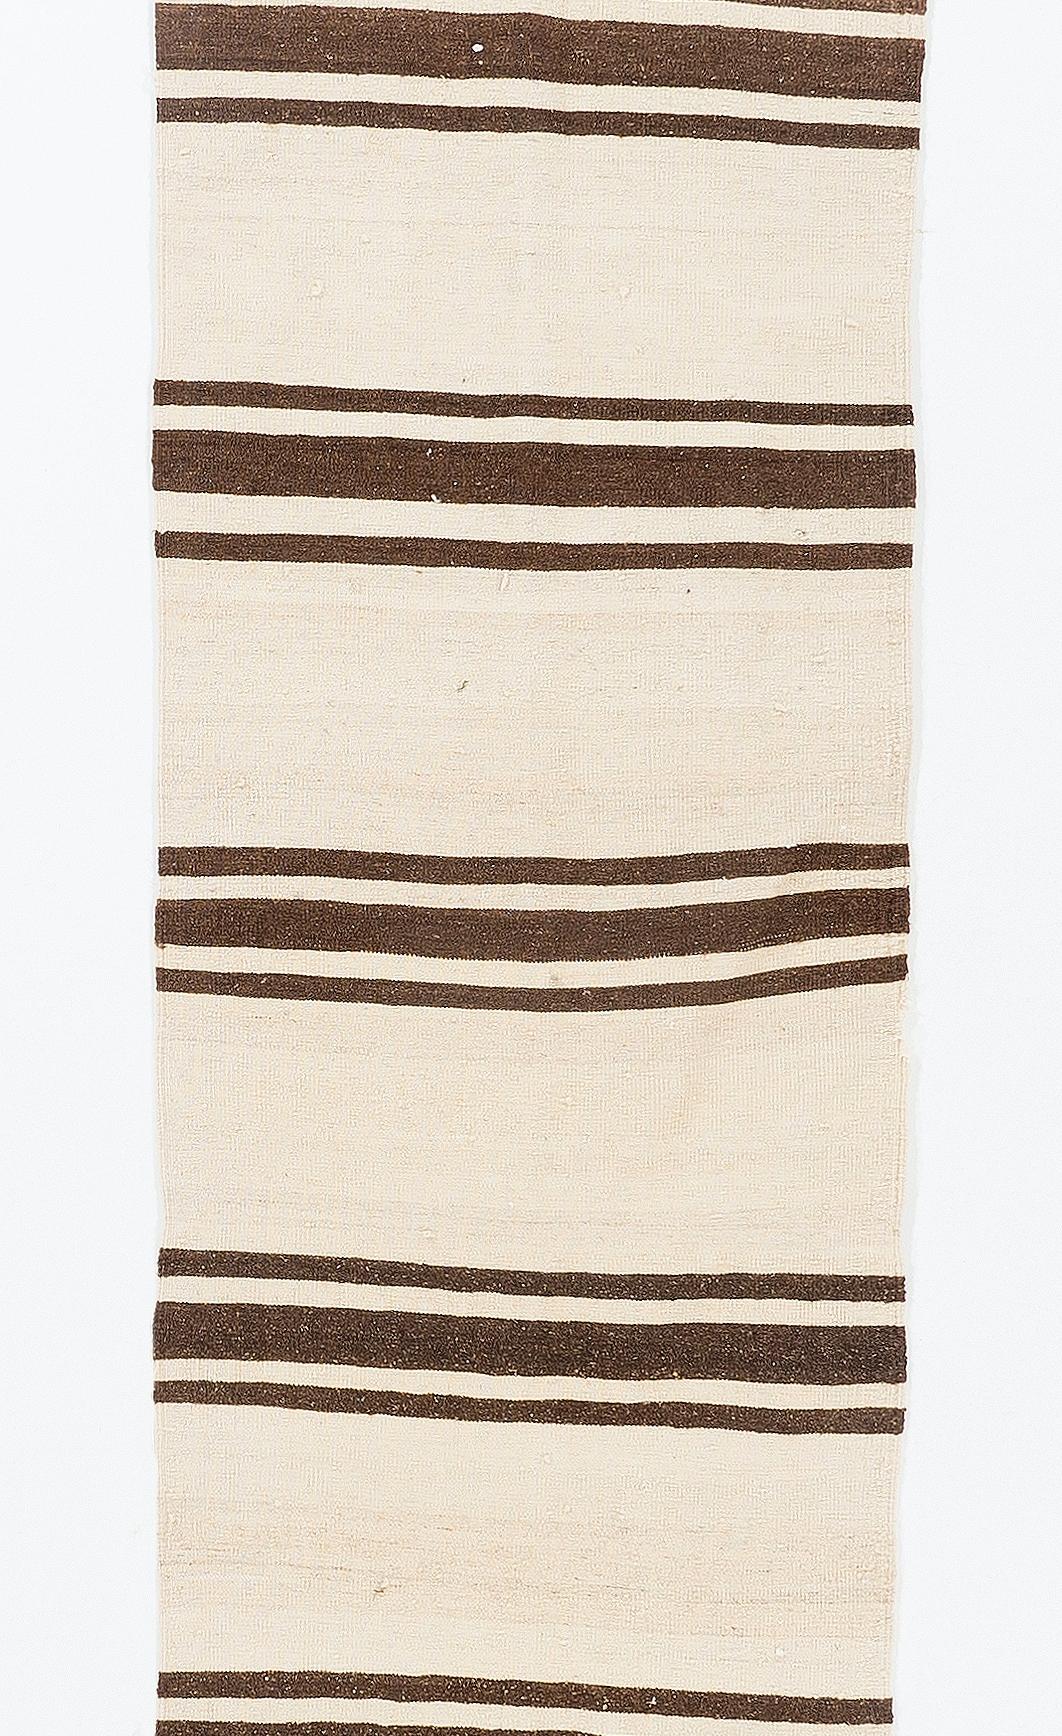 Turkish 2.4x15 Ft Handmade Vintage Striped Kilim Runner Made of Natural Un-Dyed Wool For Sale